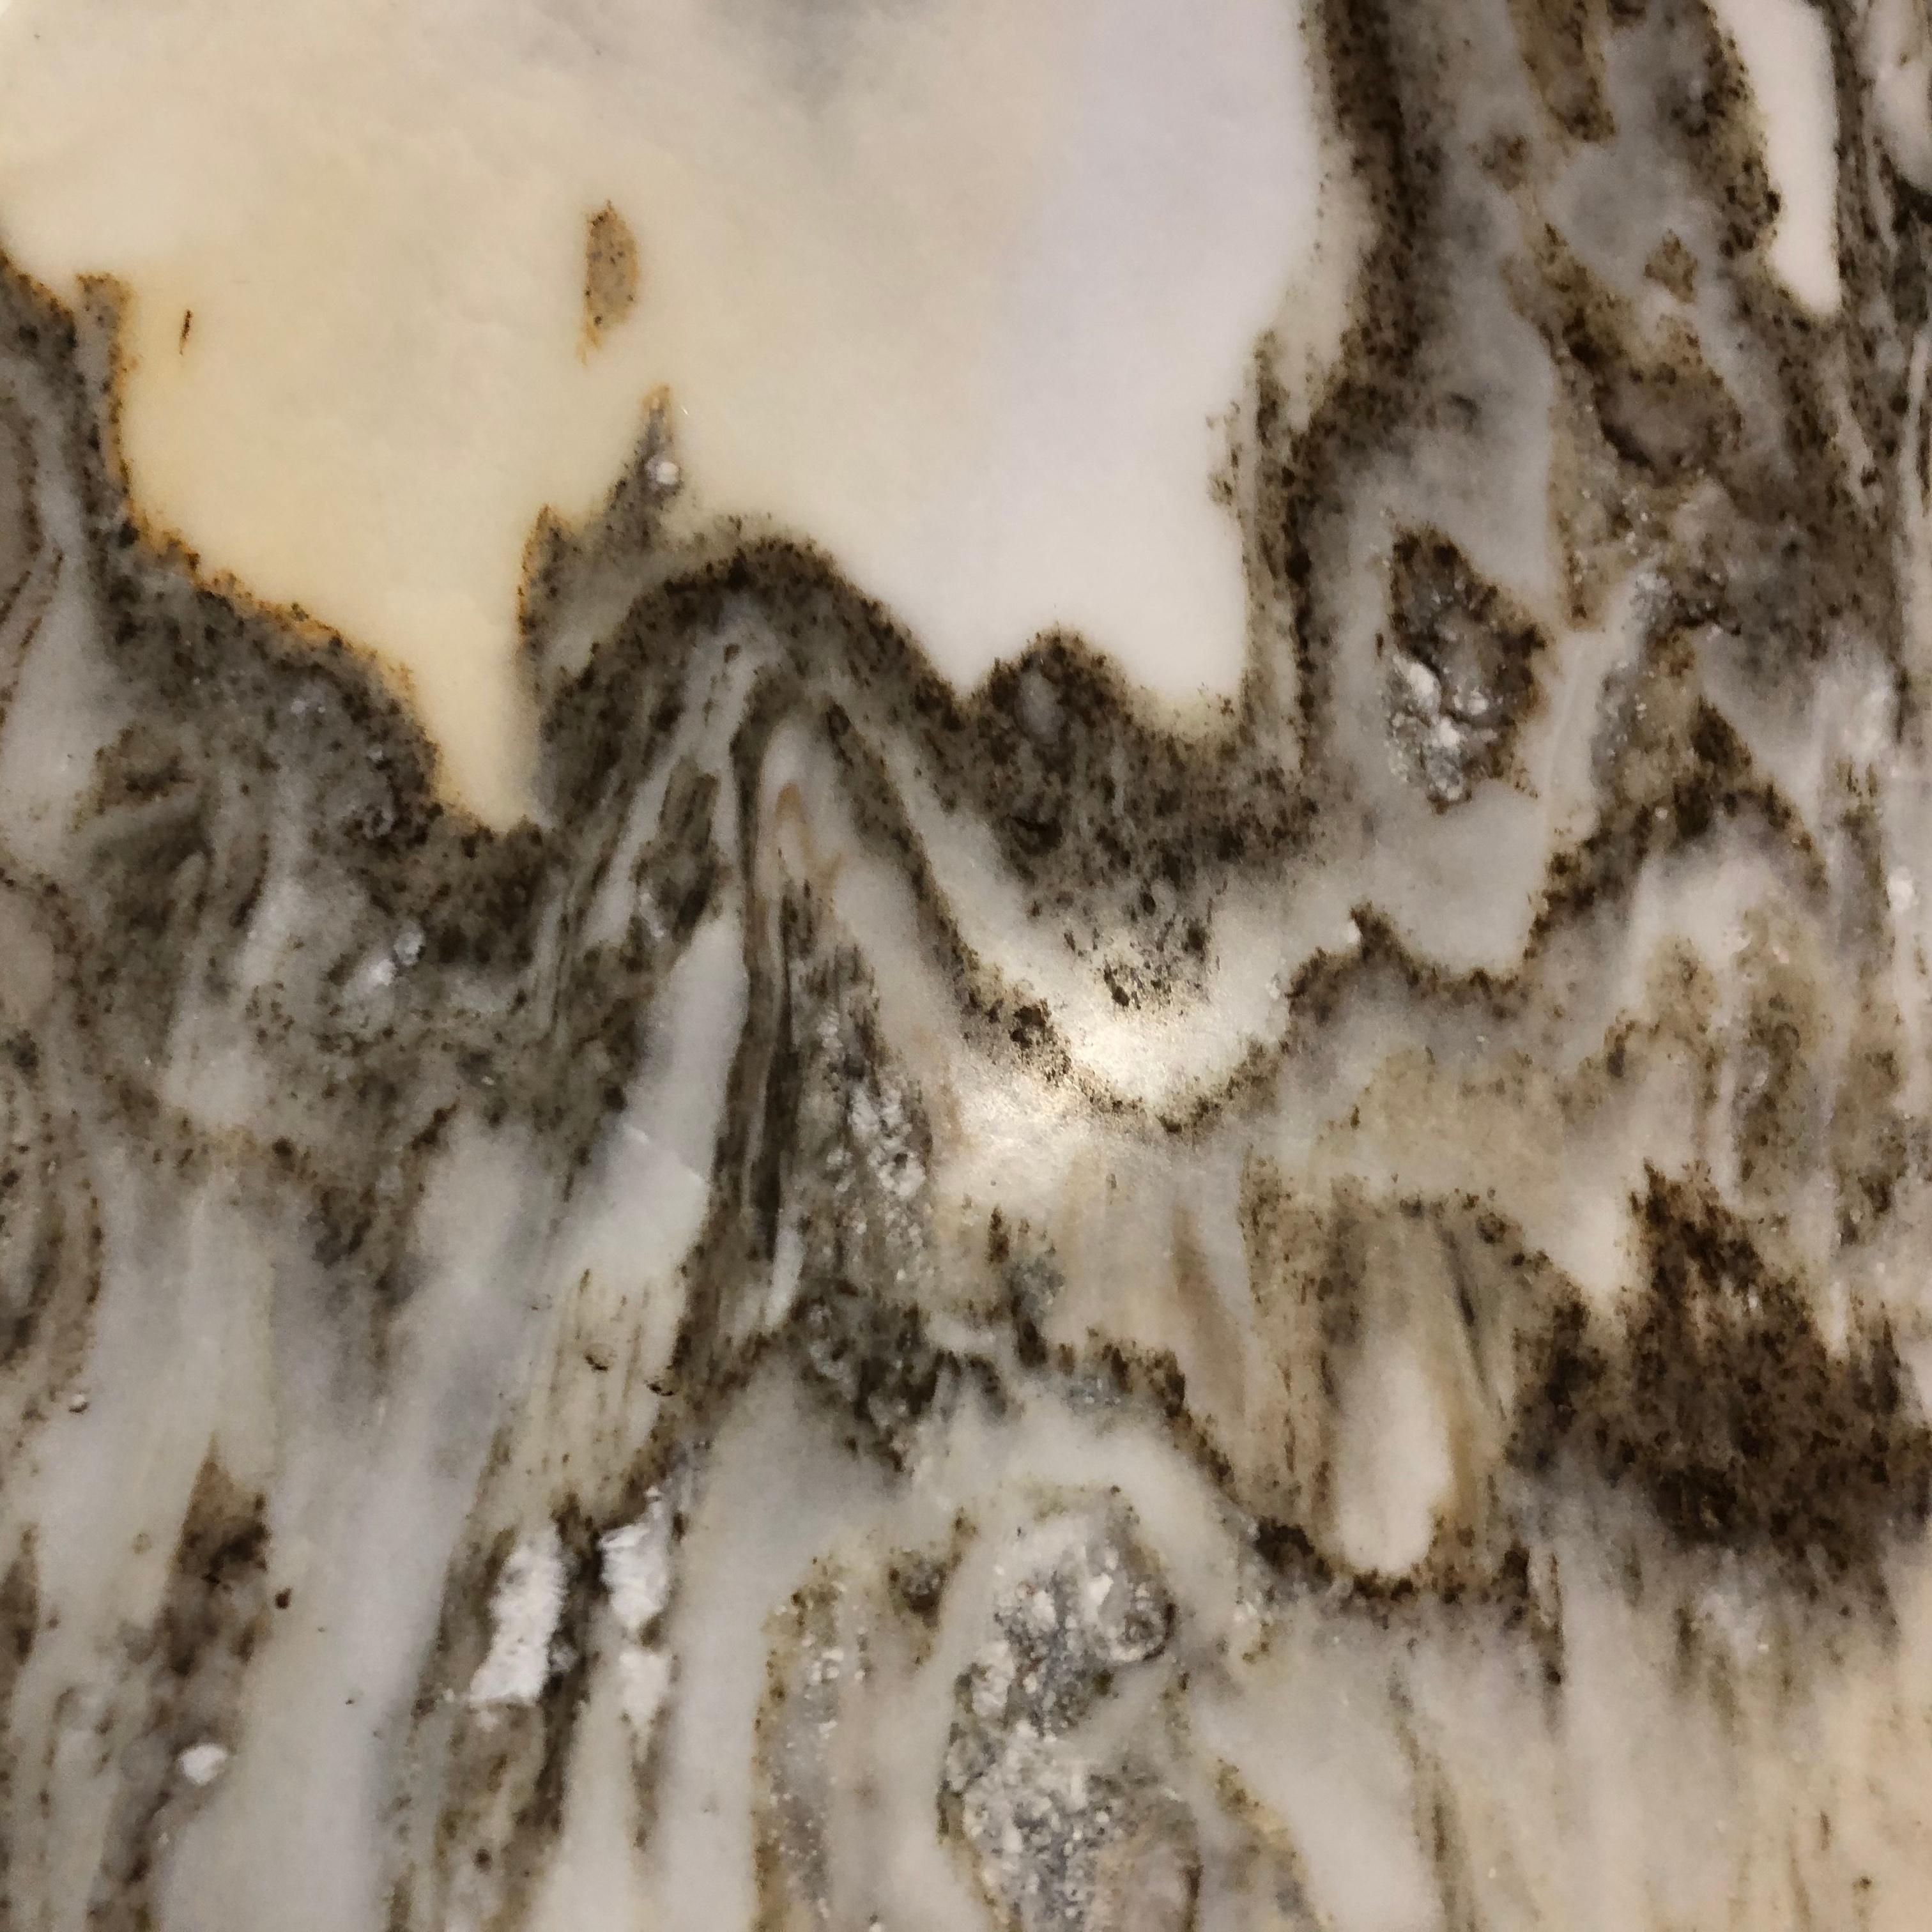 Majestic Peaks, an Extraordinary Natural Stone Painting, One-of-a-Kind 1